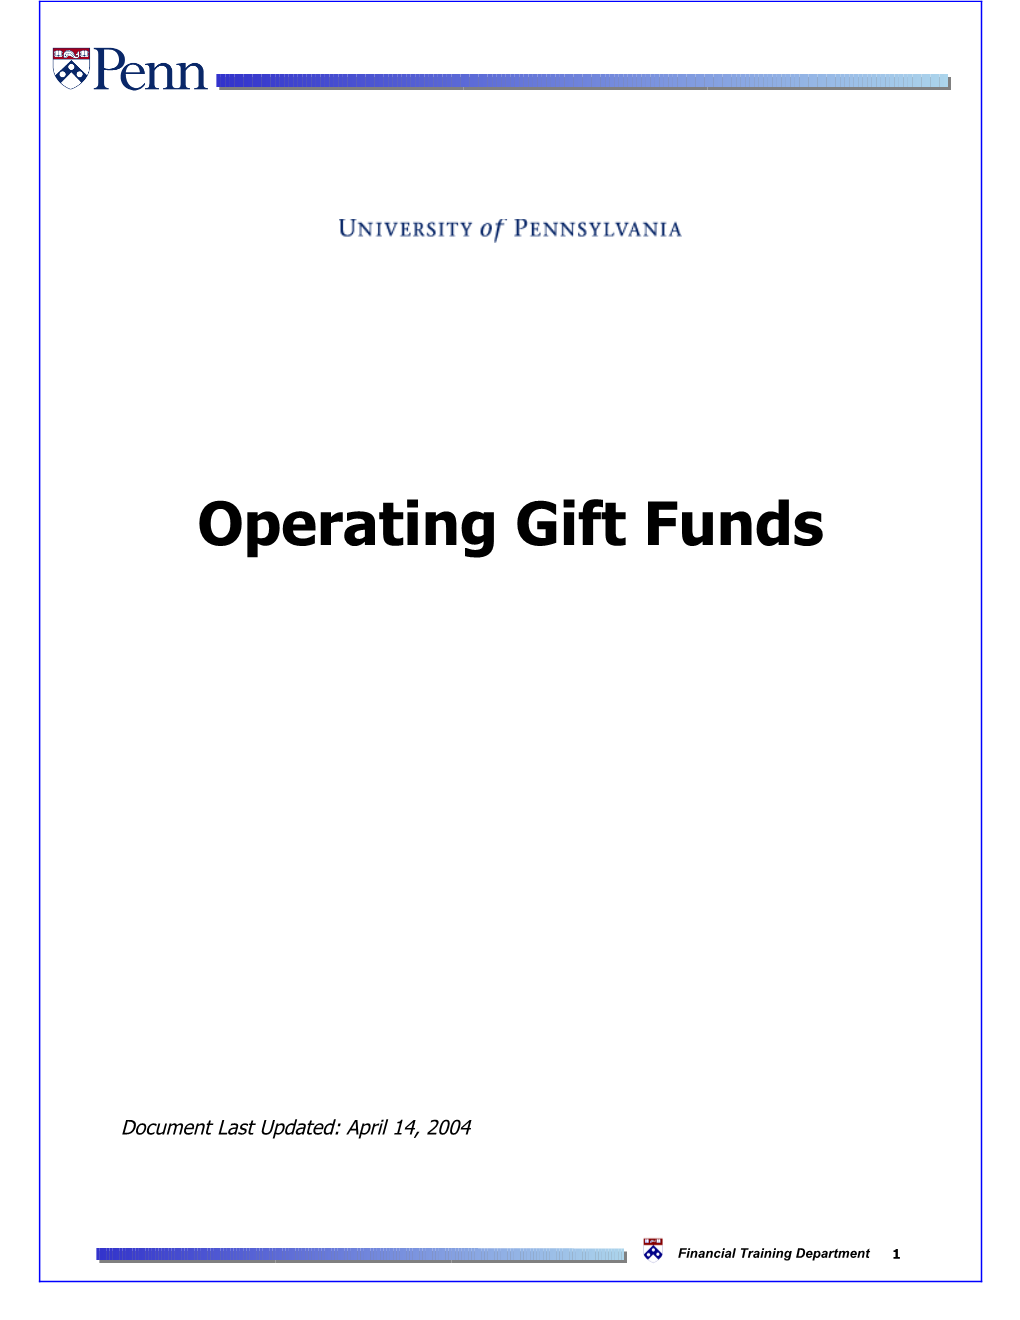 Operating Gift Funds